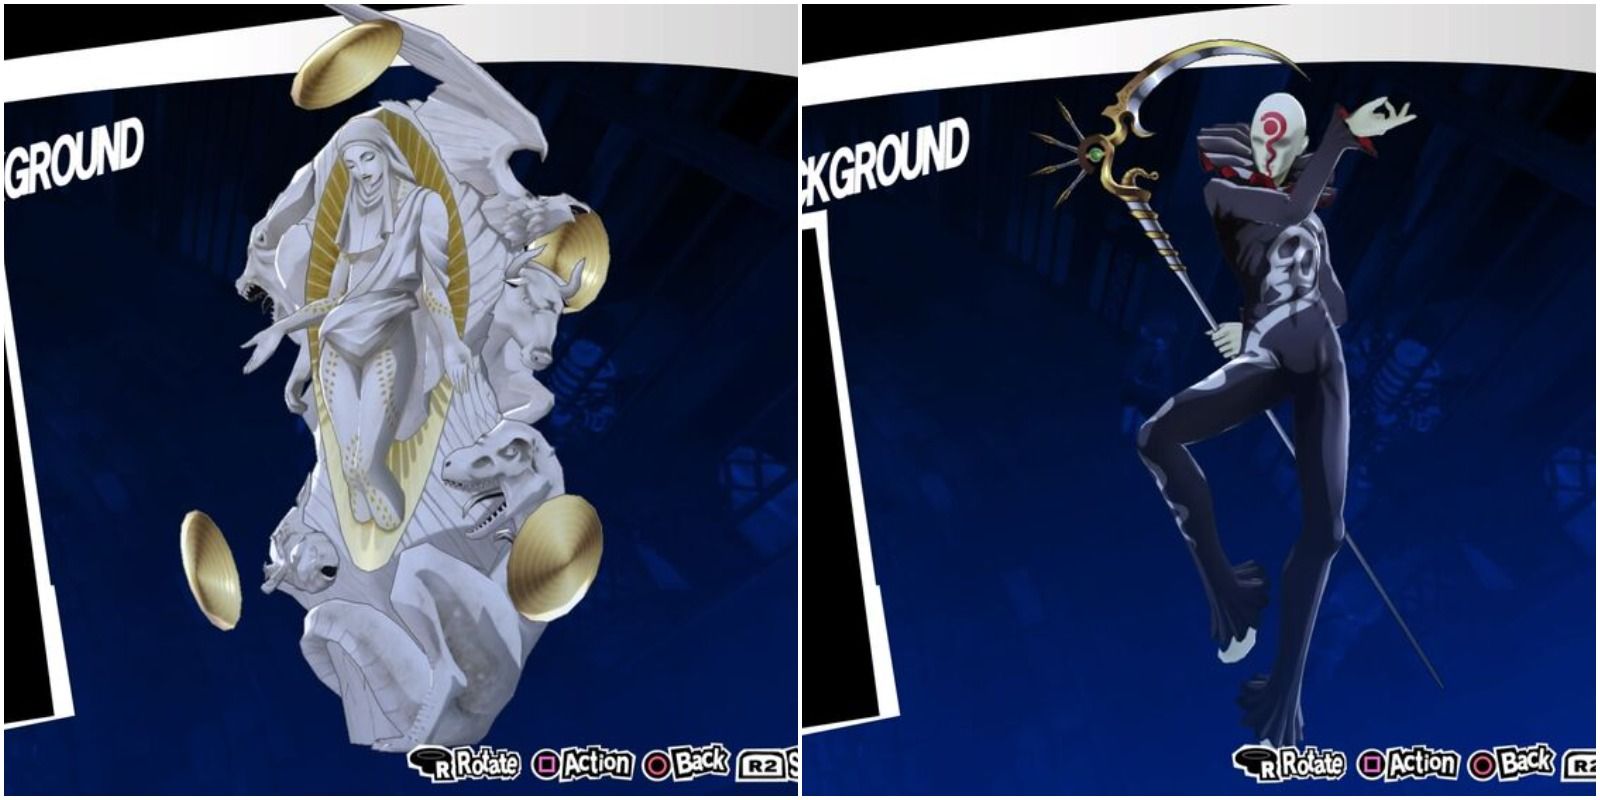 the virgin mary and a god of death in persona 5 royal